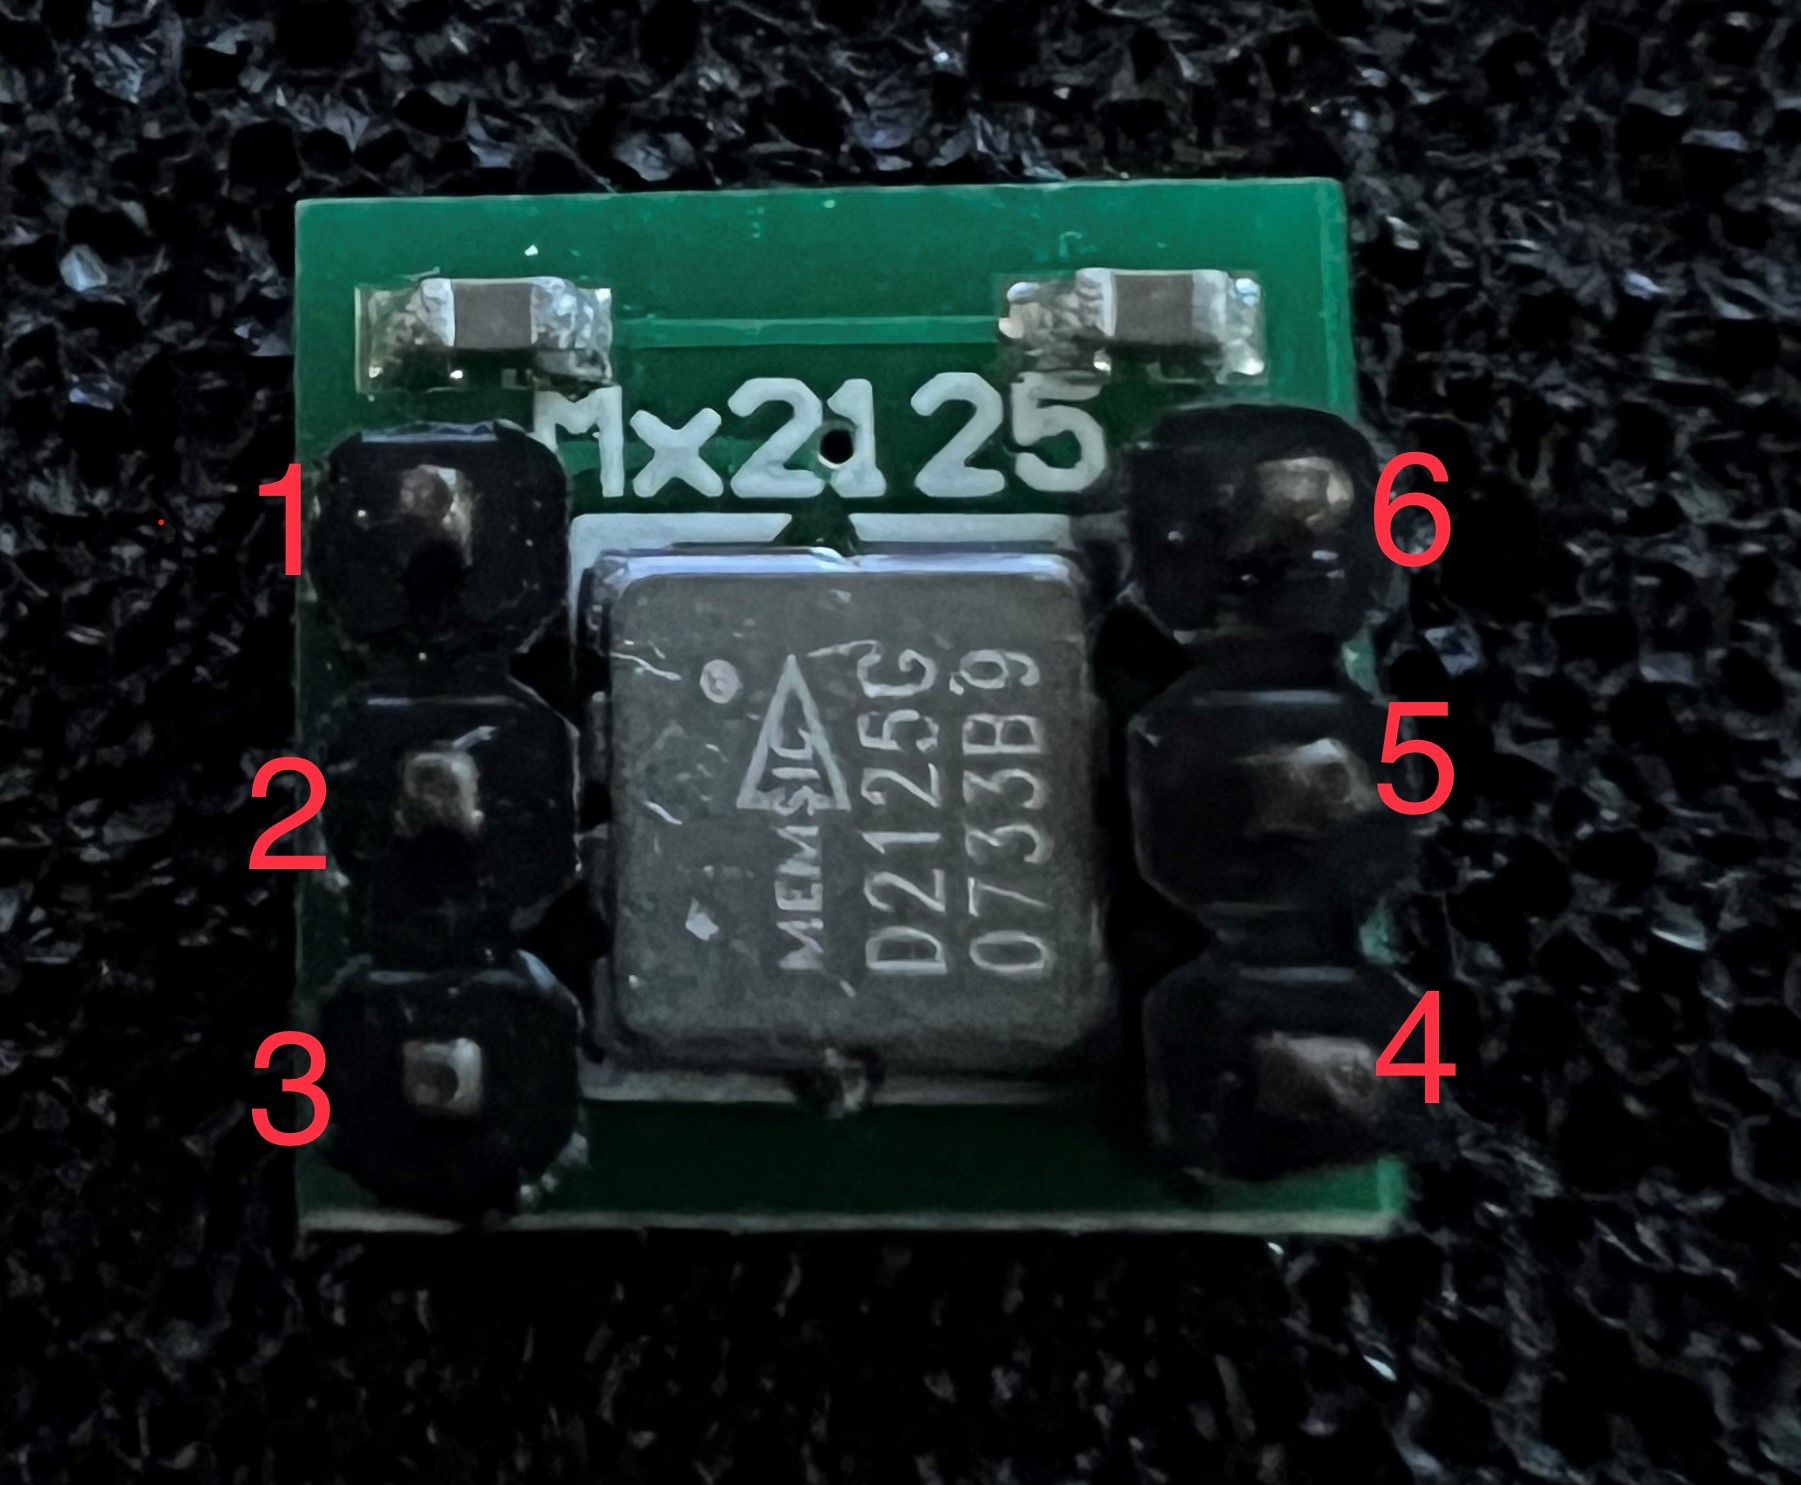 Mx2125 chip with pin 1 on top-left